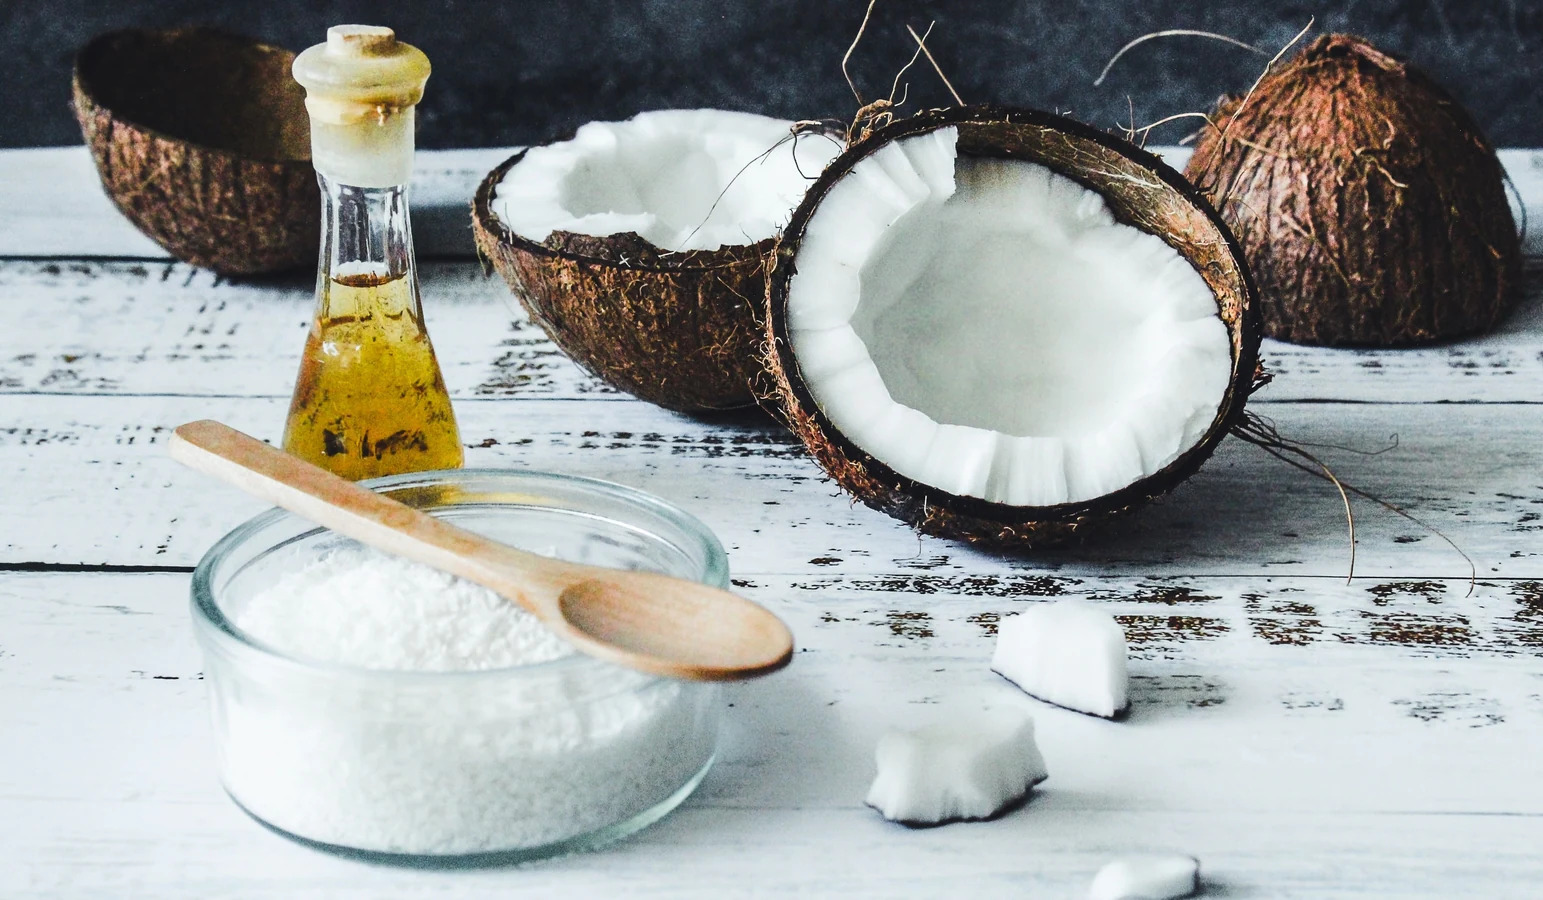 Coconut Oil Anti-Aging Face Masks